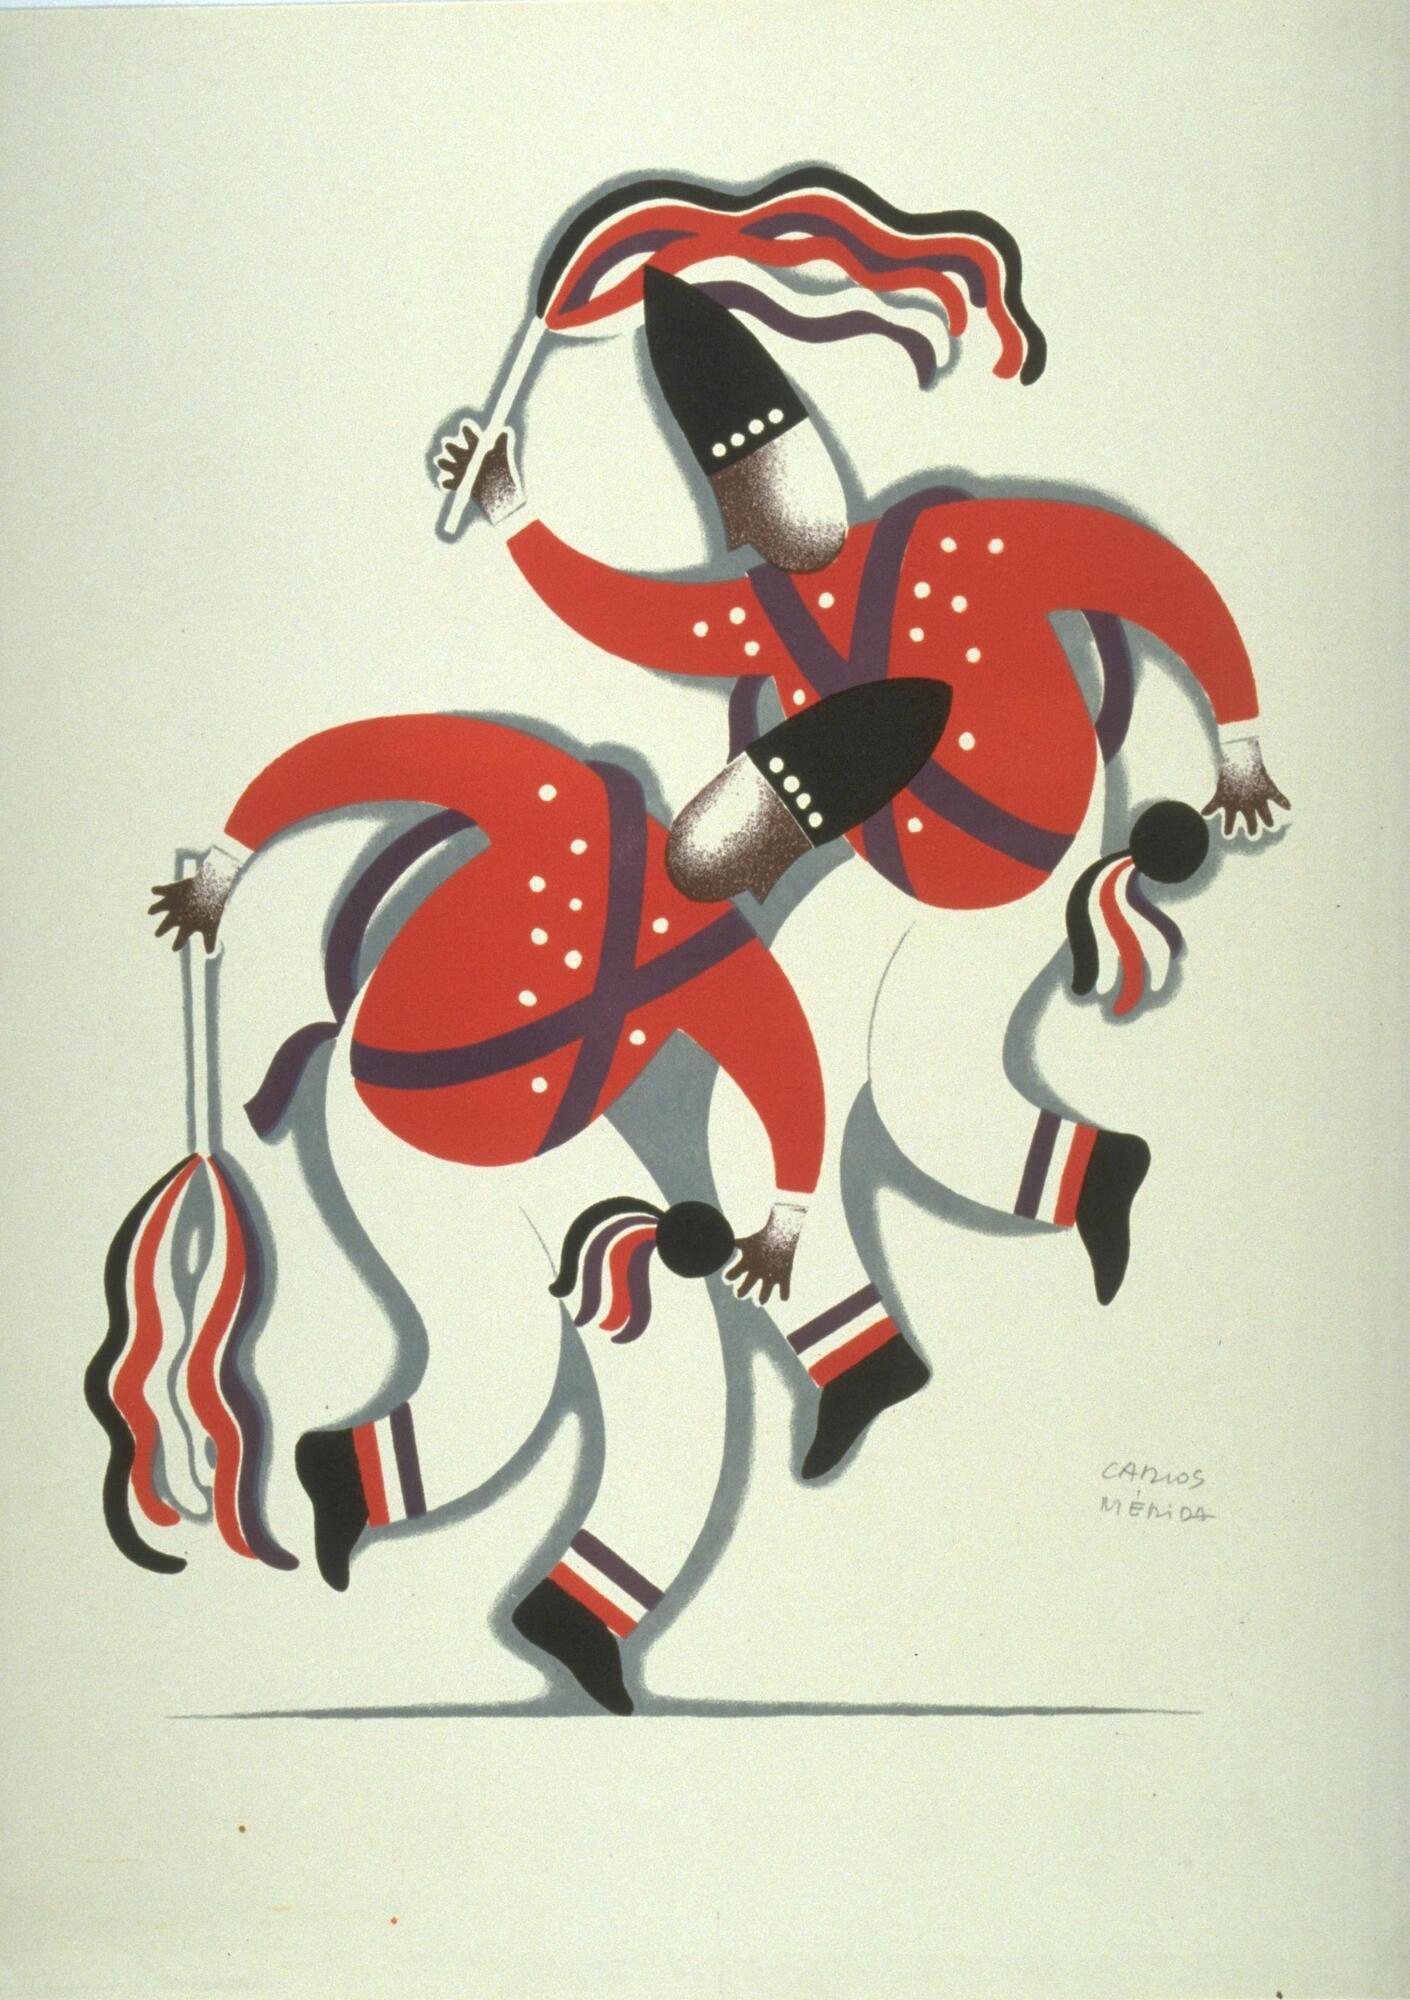 Centered on the page, this print shows two figures. They both wear white pants trimmed in red and purple and a red shirt with white spots. Both figures have purple suspenders and a black hat with four white spots around the brim. Each figure holds a round black object with black, red and purple flares in one hand and a white pole with black, red, white and purple flares in the other.